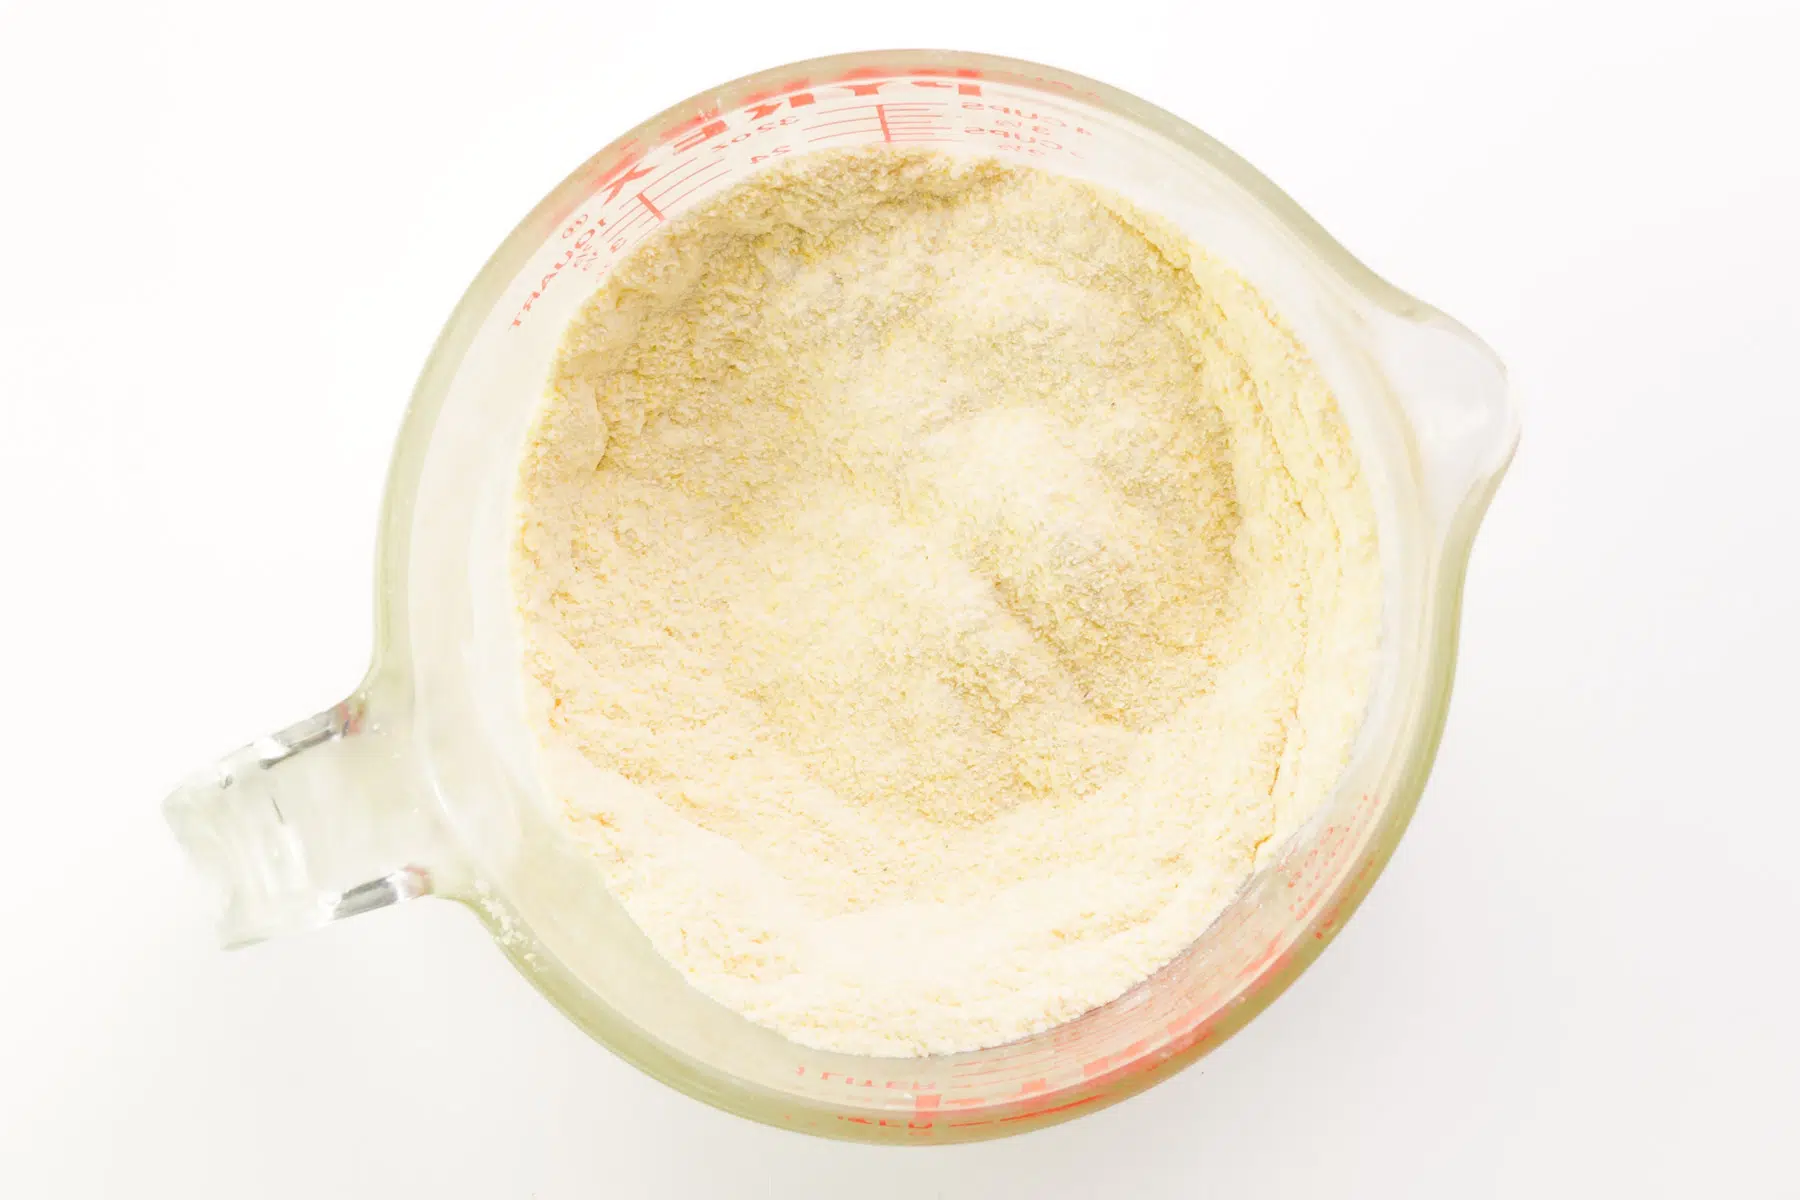 Cornstarch and flour have been mixed in a bowl along with other ingredients.